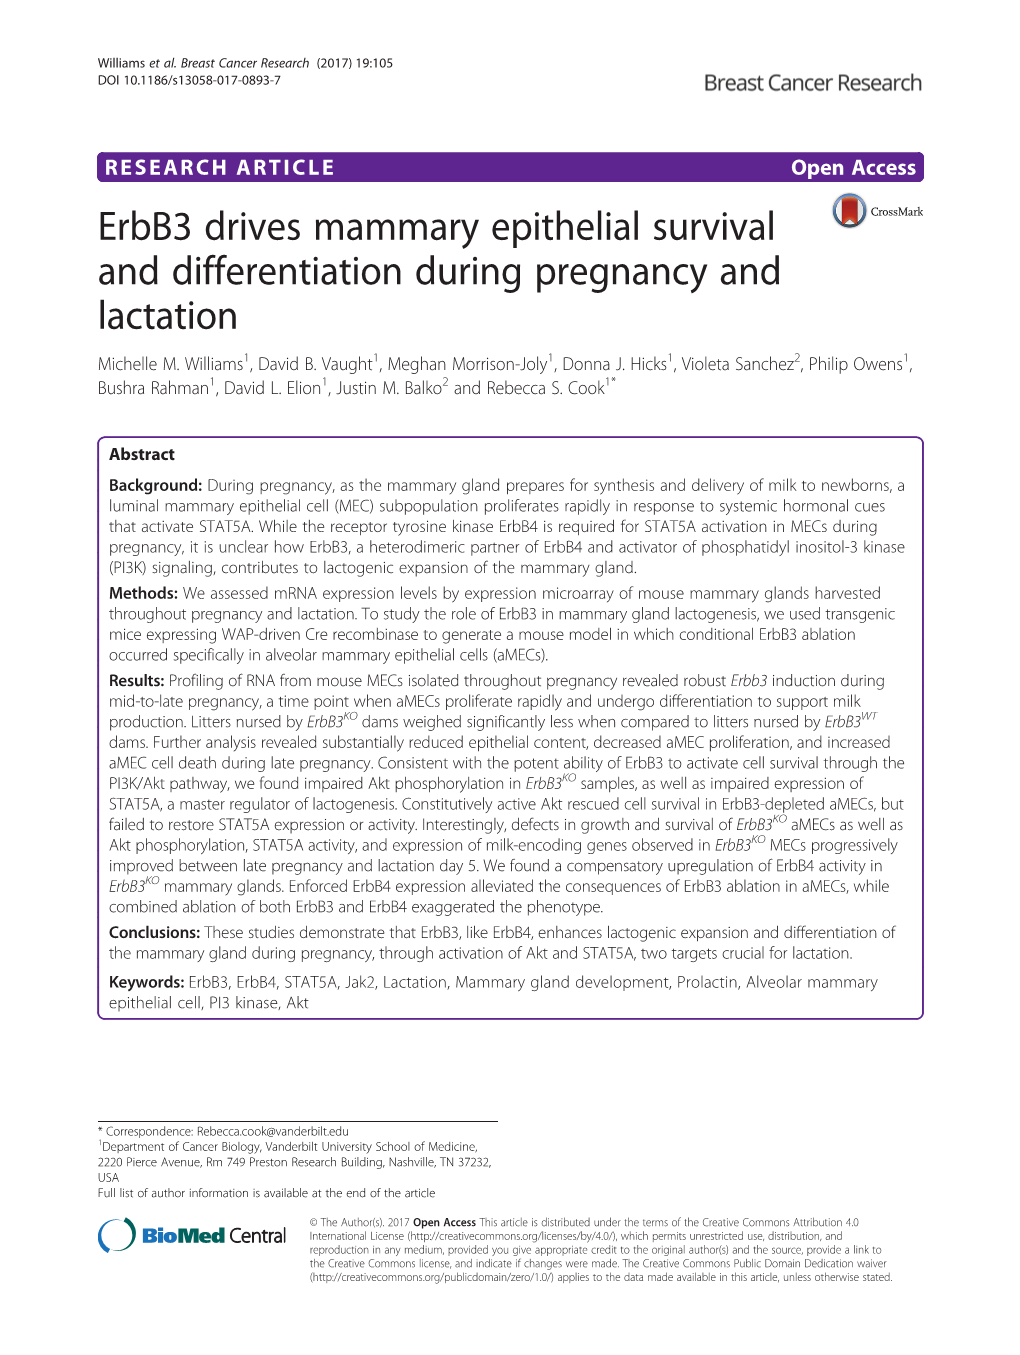 Erbb3 Drives Mammary Epithelial Survival and Differentiation During Pregnancy and Lactation Michelle M